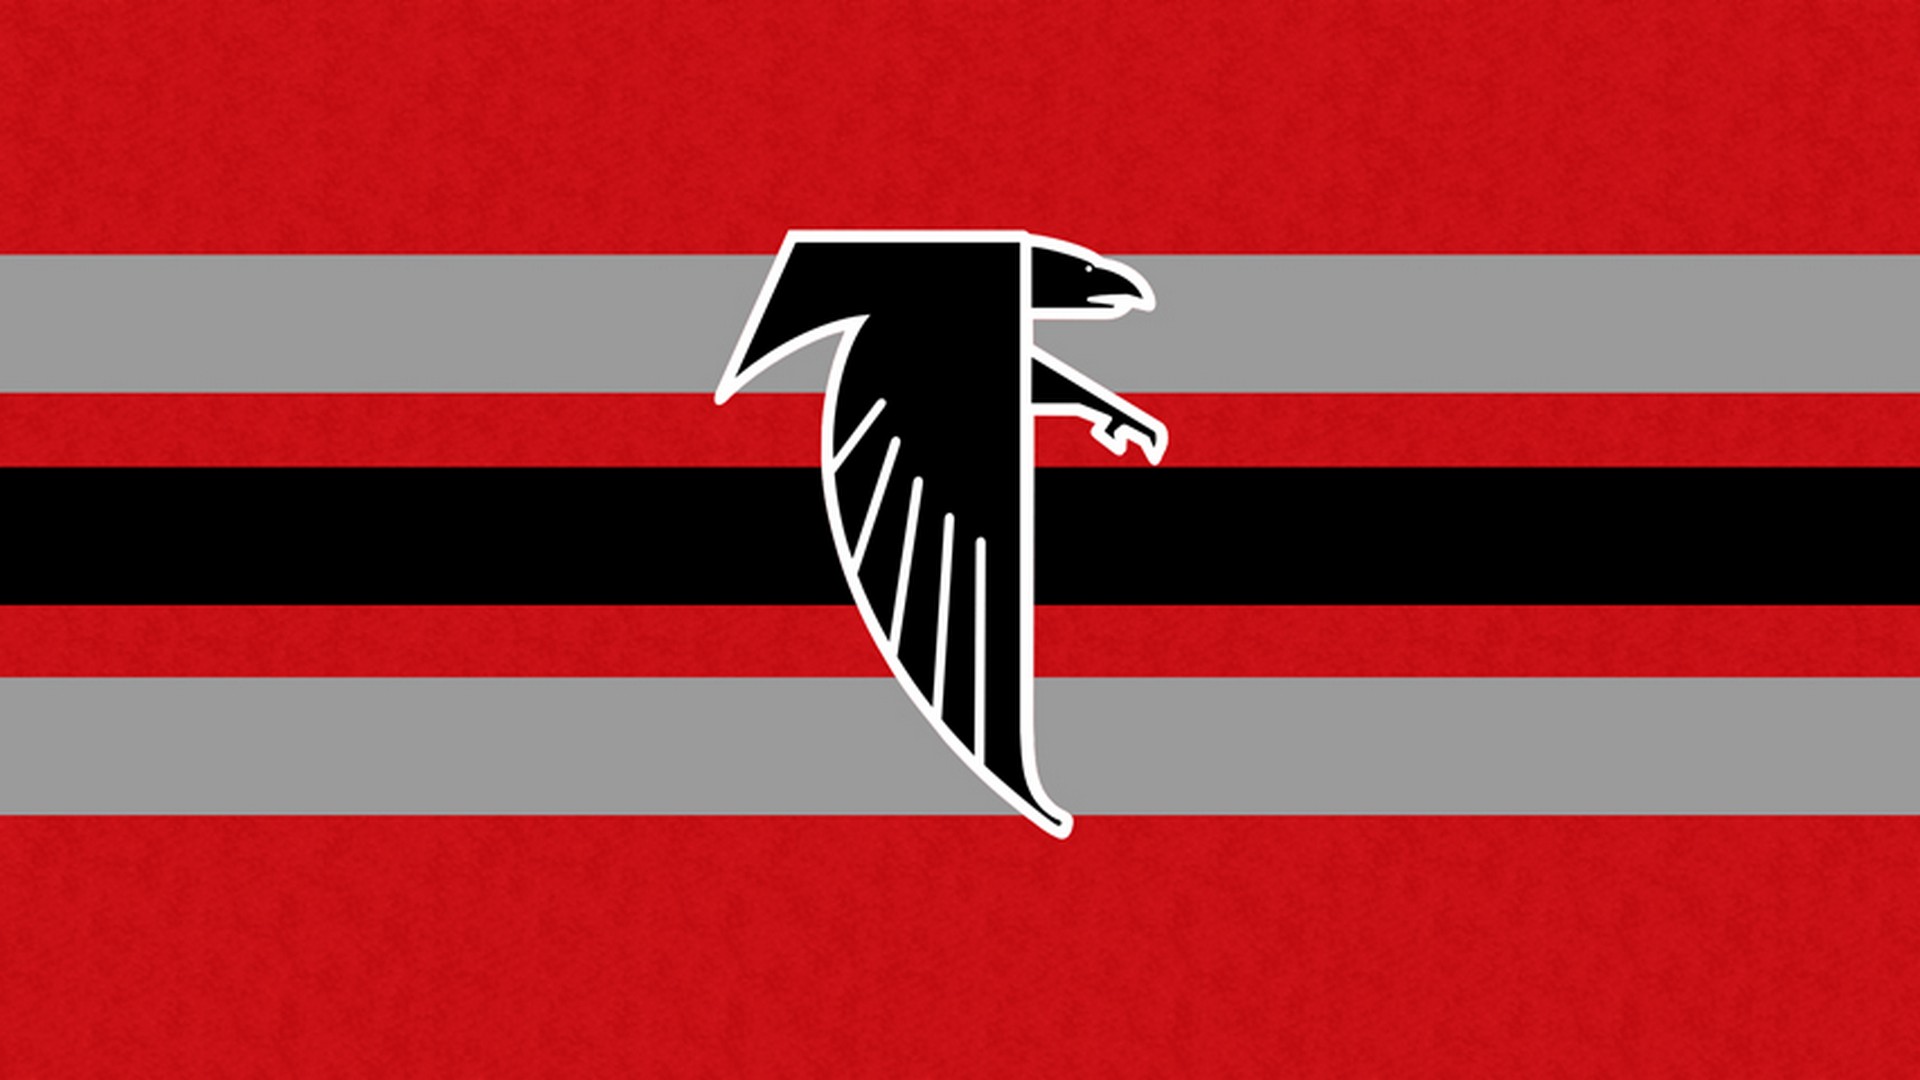 Falcons Desktop Wallpaper With high-resolution 1920X1080 pixel. You can use this wallpaper for your Mac or Windows Desktop Background, iPhone, Android or Tablet and another Smartphone device